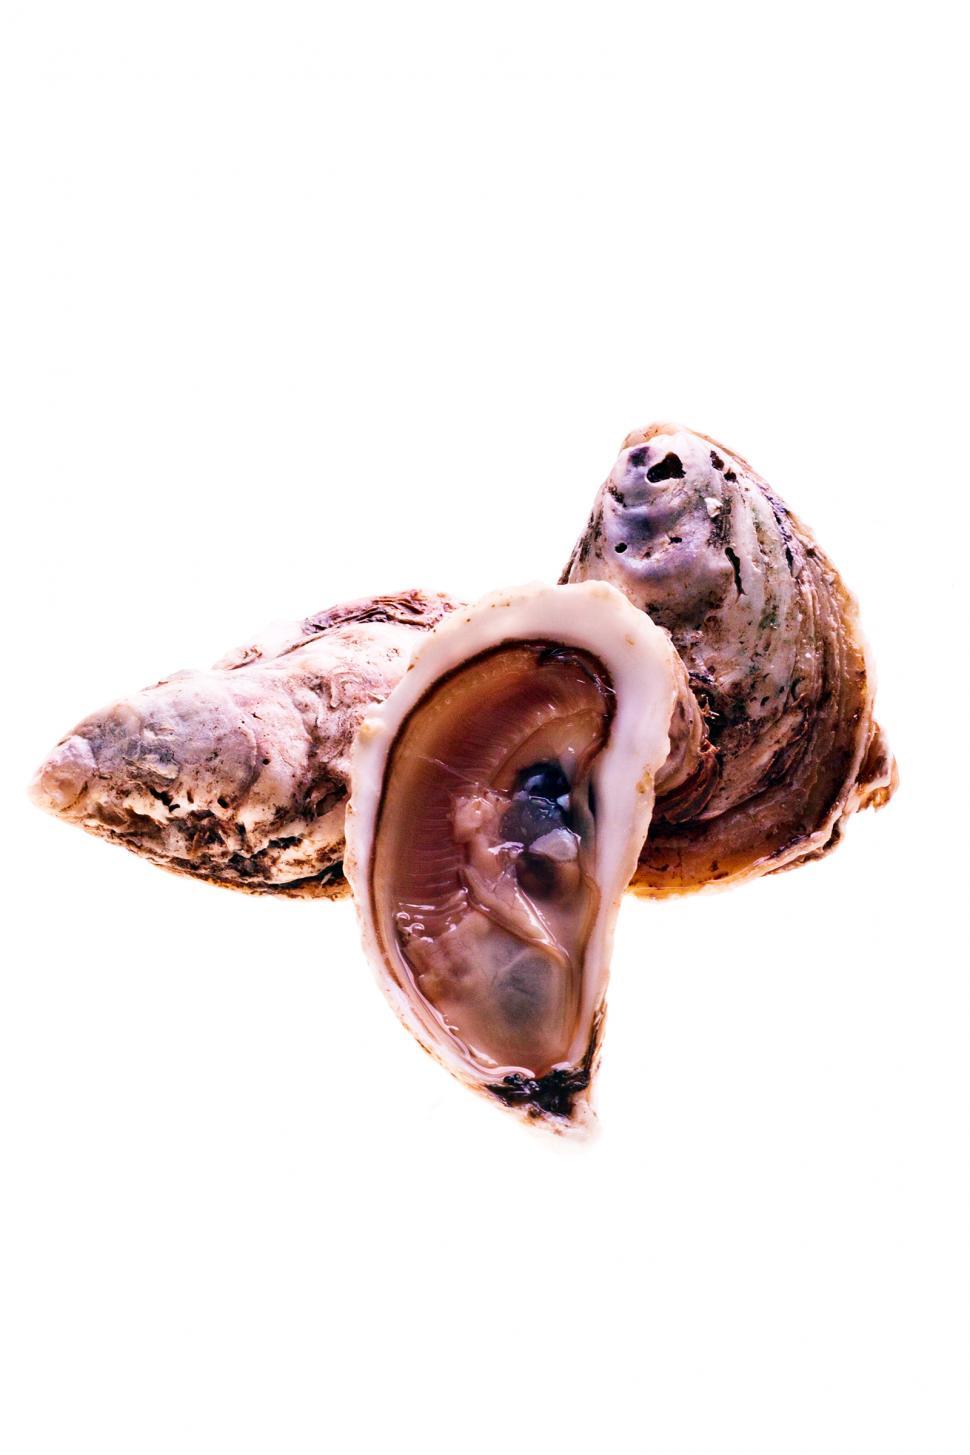 Free Image of Oysters 